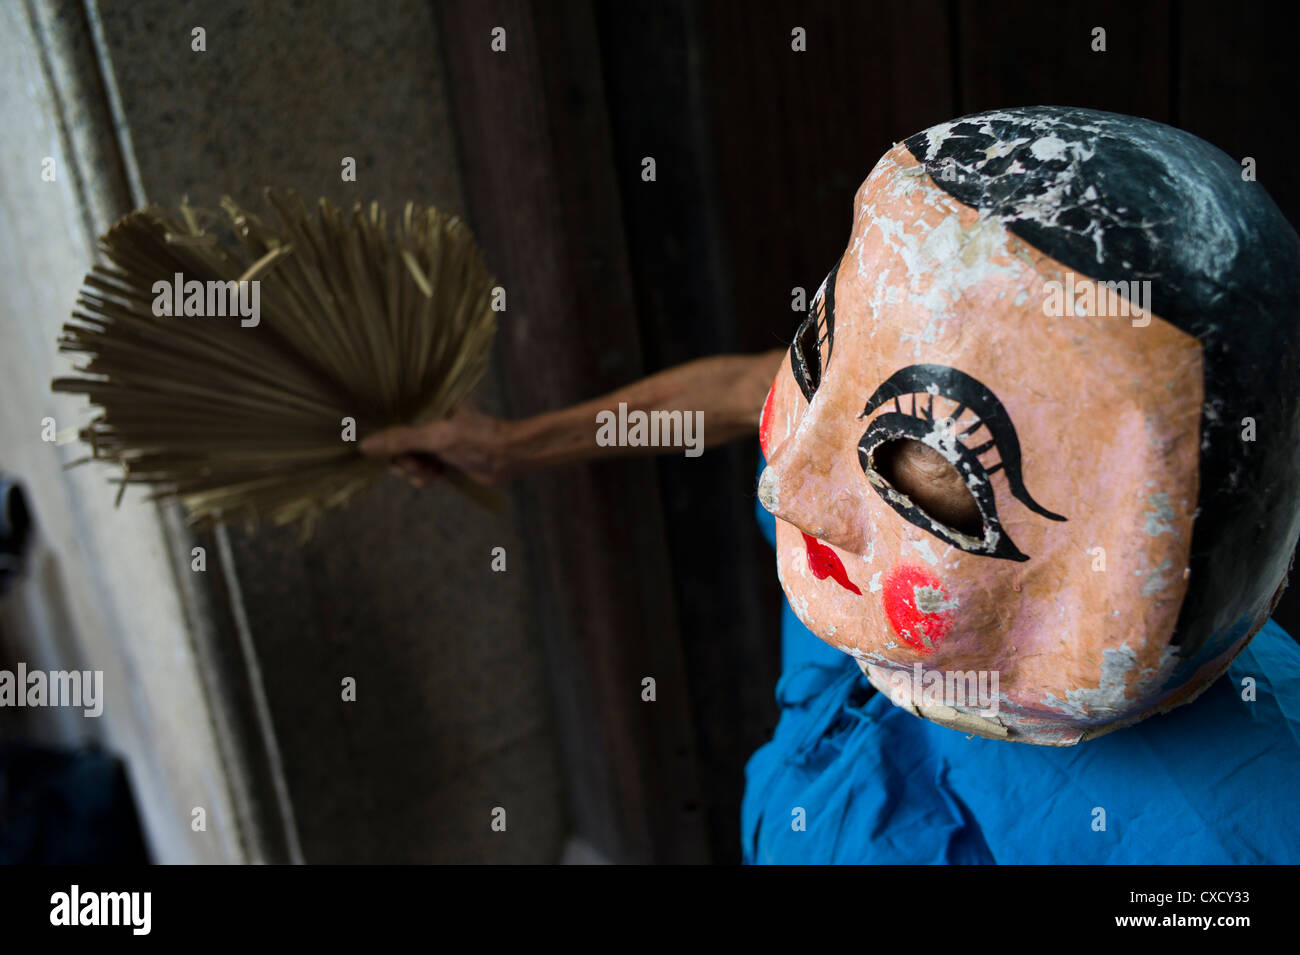 The traditional Big Head Buddha dance of Foshan in Guangdong province, China Stock Photo